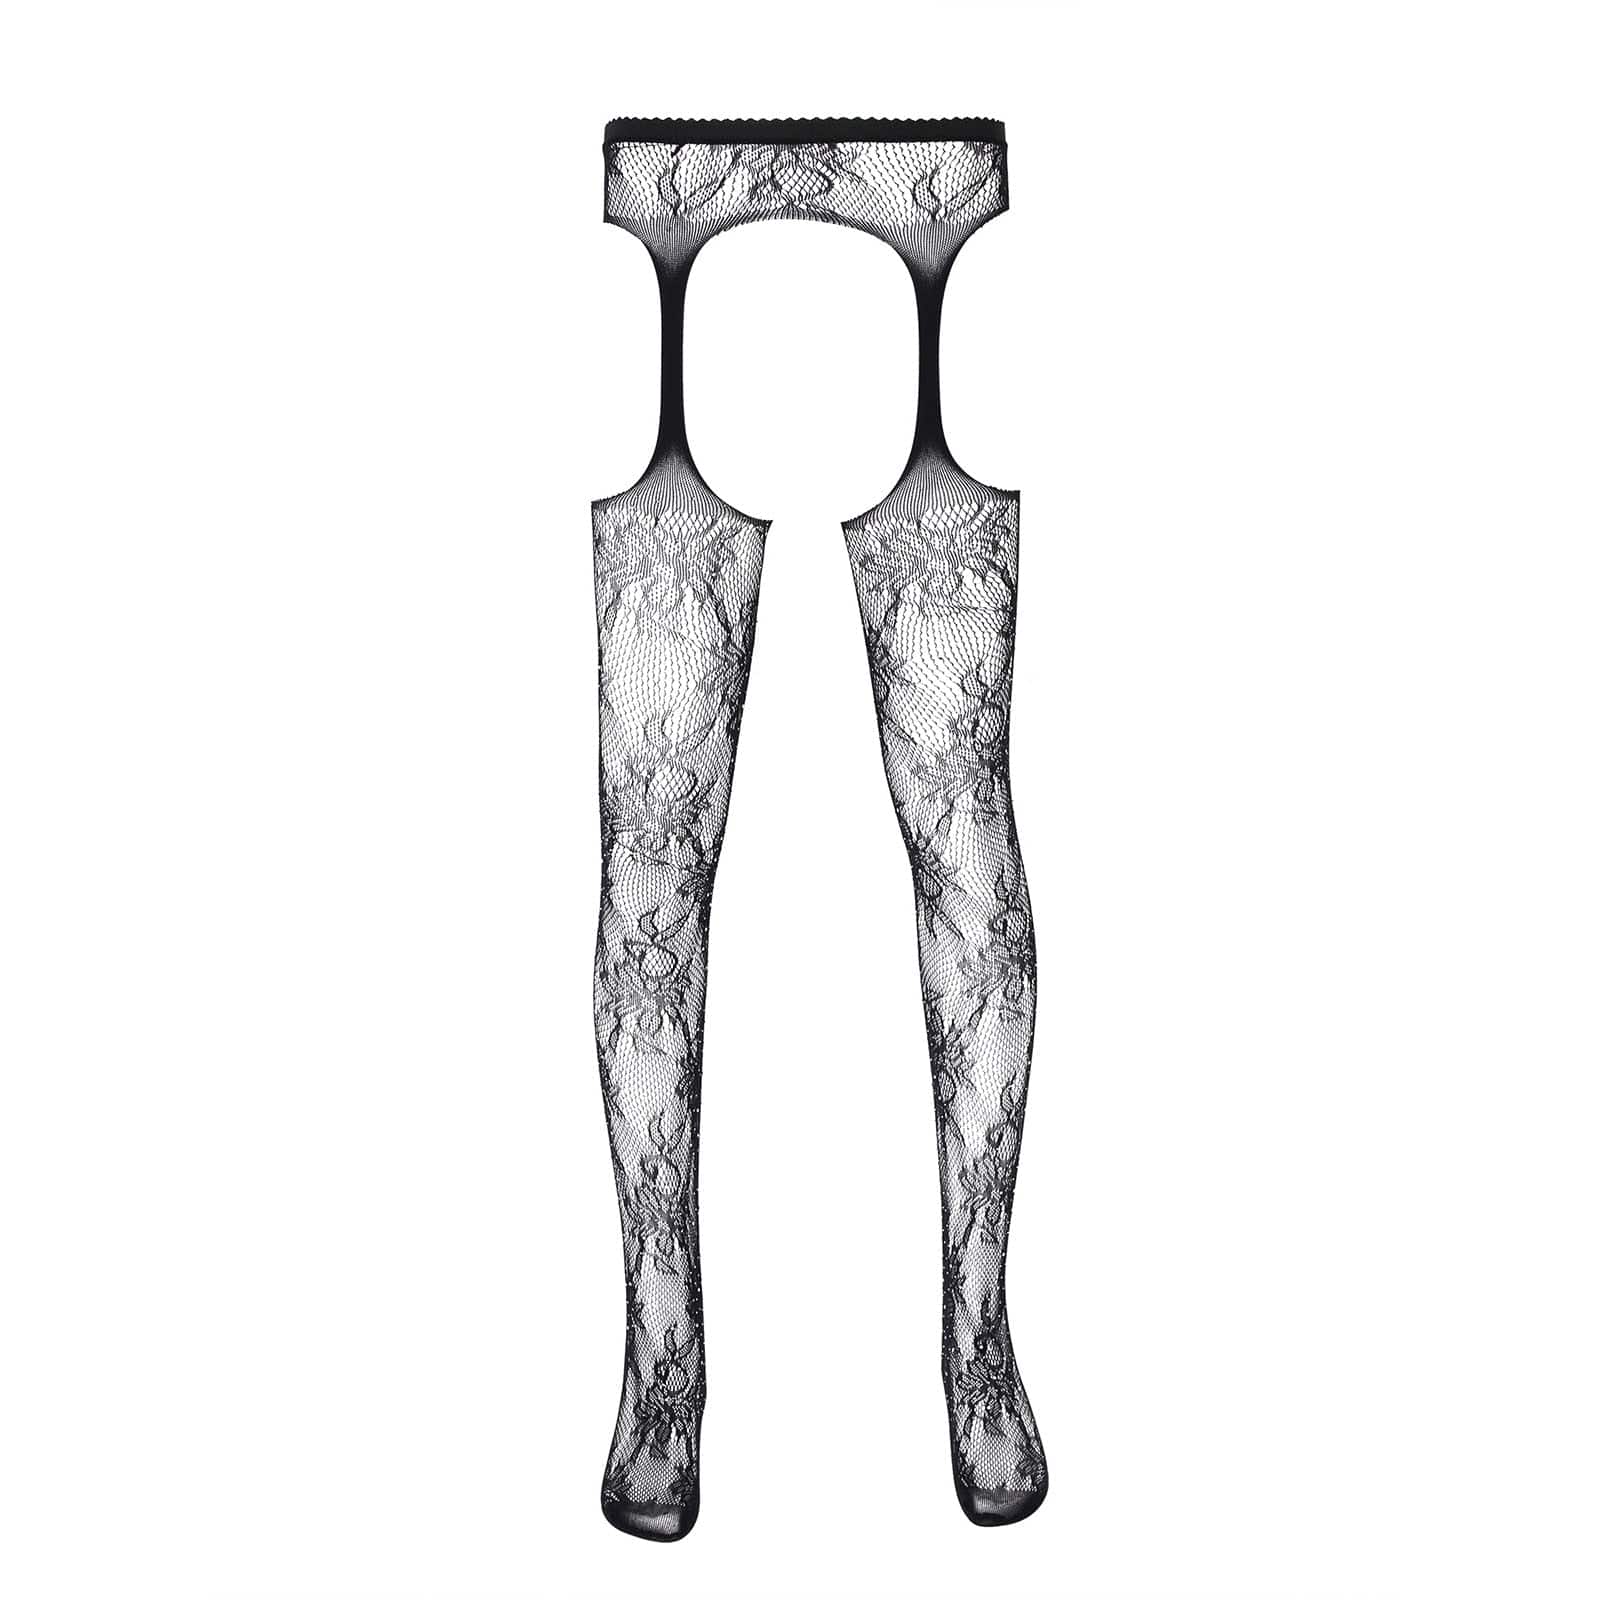 Kinky Cloth Type C Mens Stretchy Hollow Out Stocking